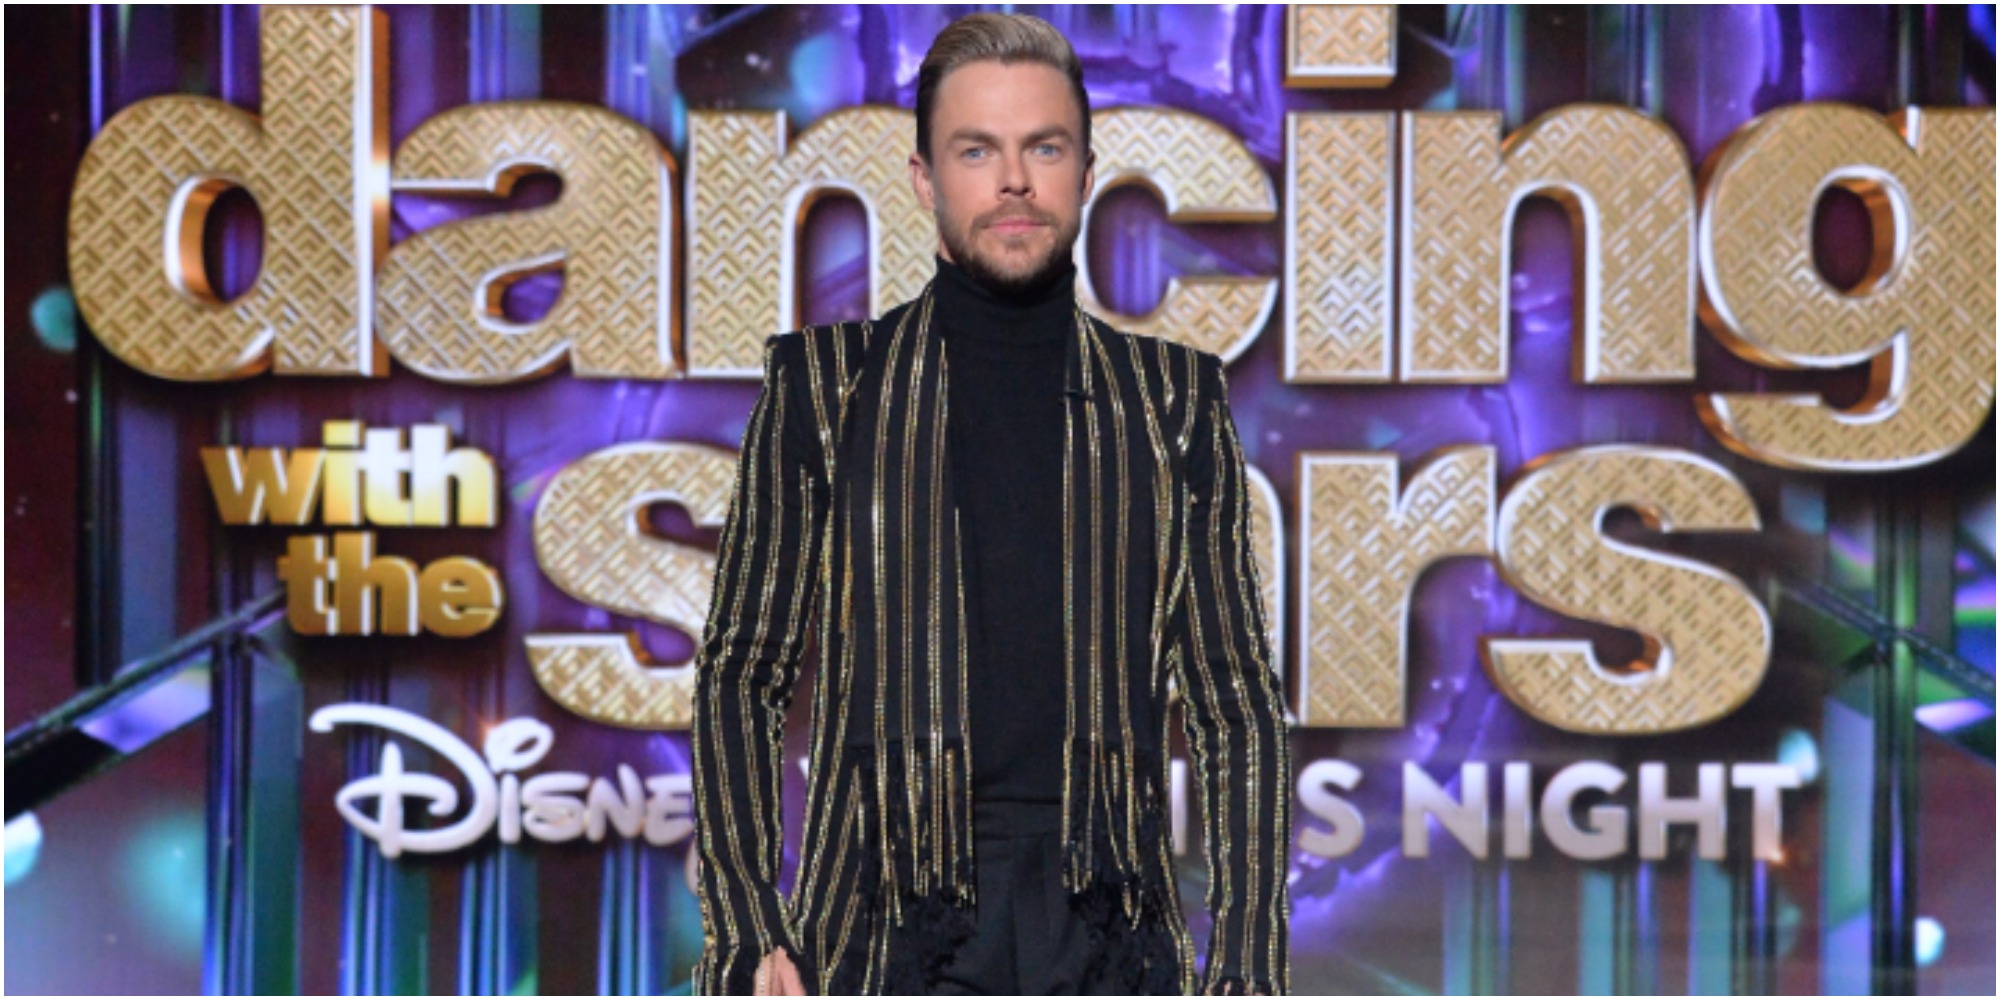 Derek Hough wears a black turtleneck on the set of Dancing with the Stars.